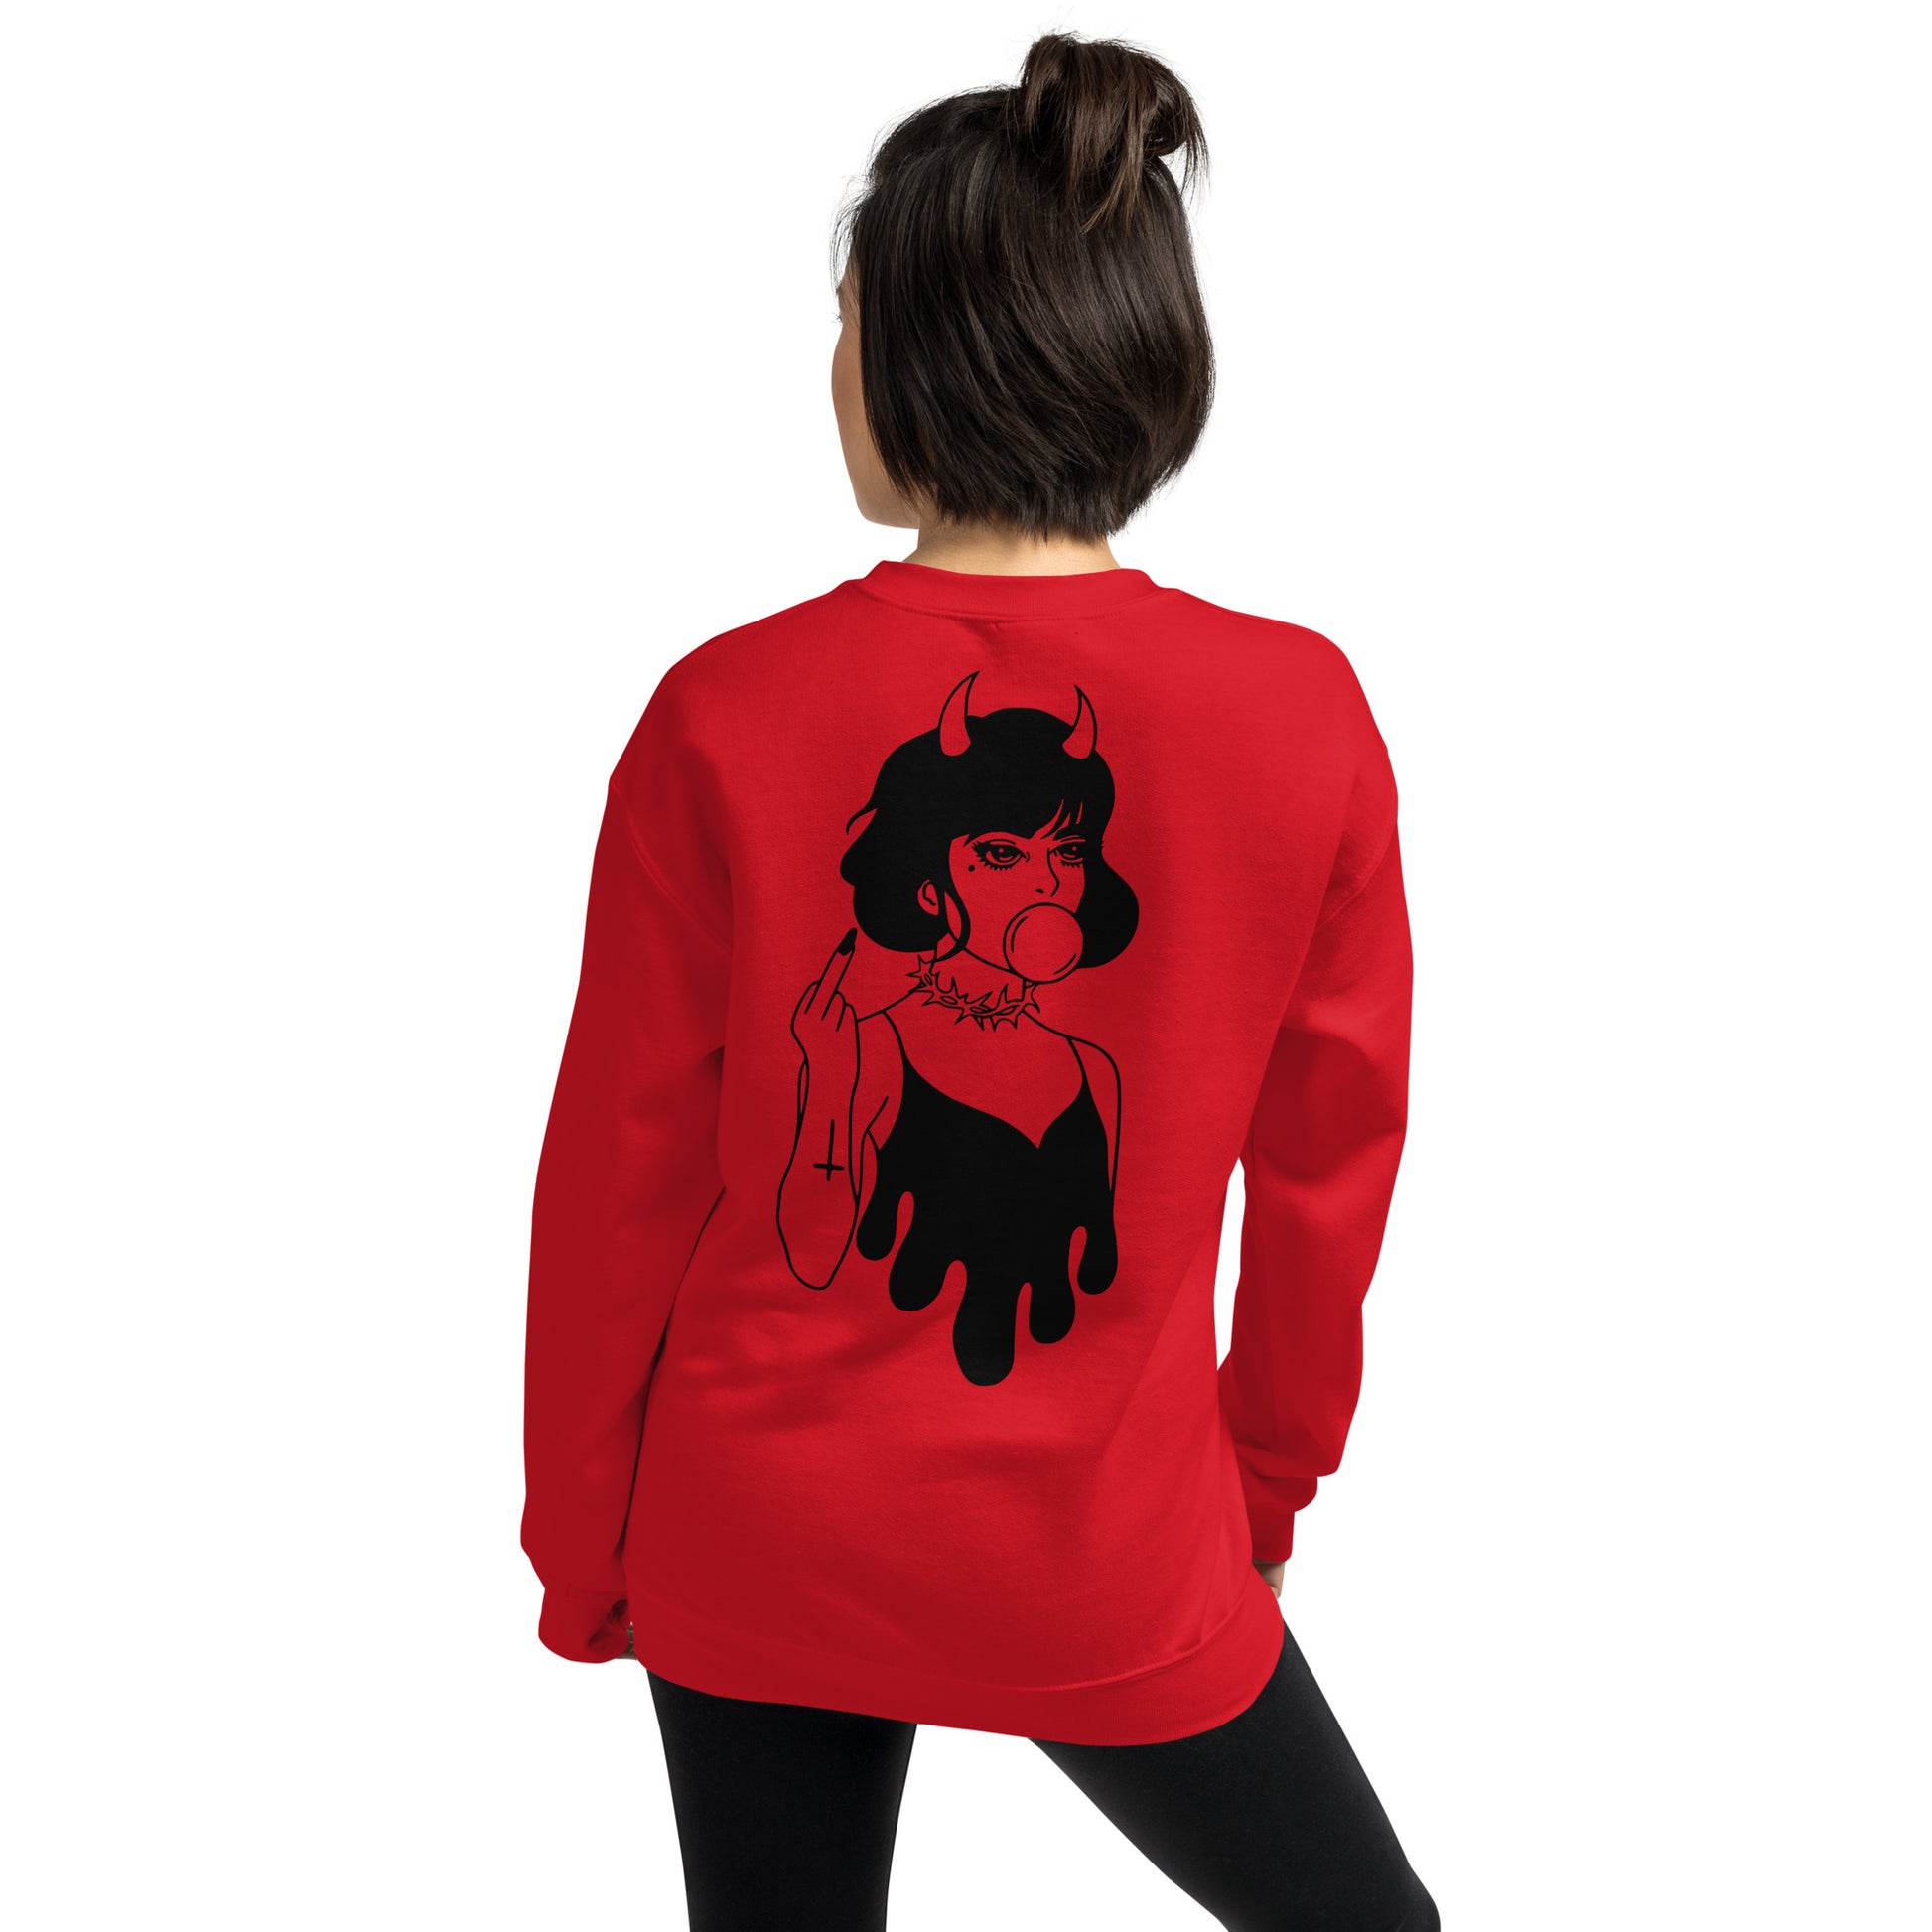 Middle Finger Sweatshirt / Goth Clothing / Red Color